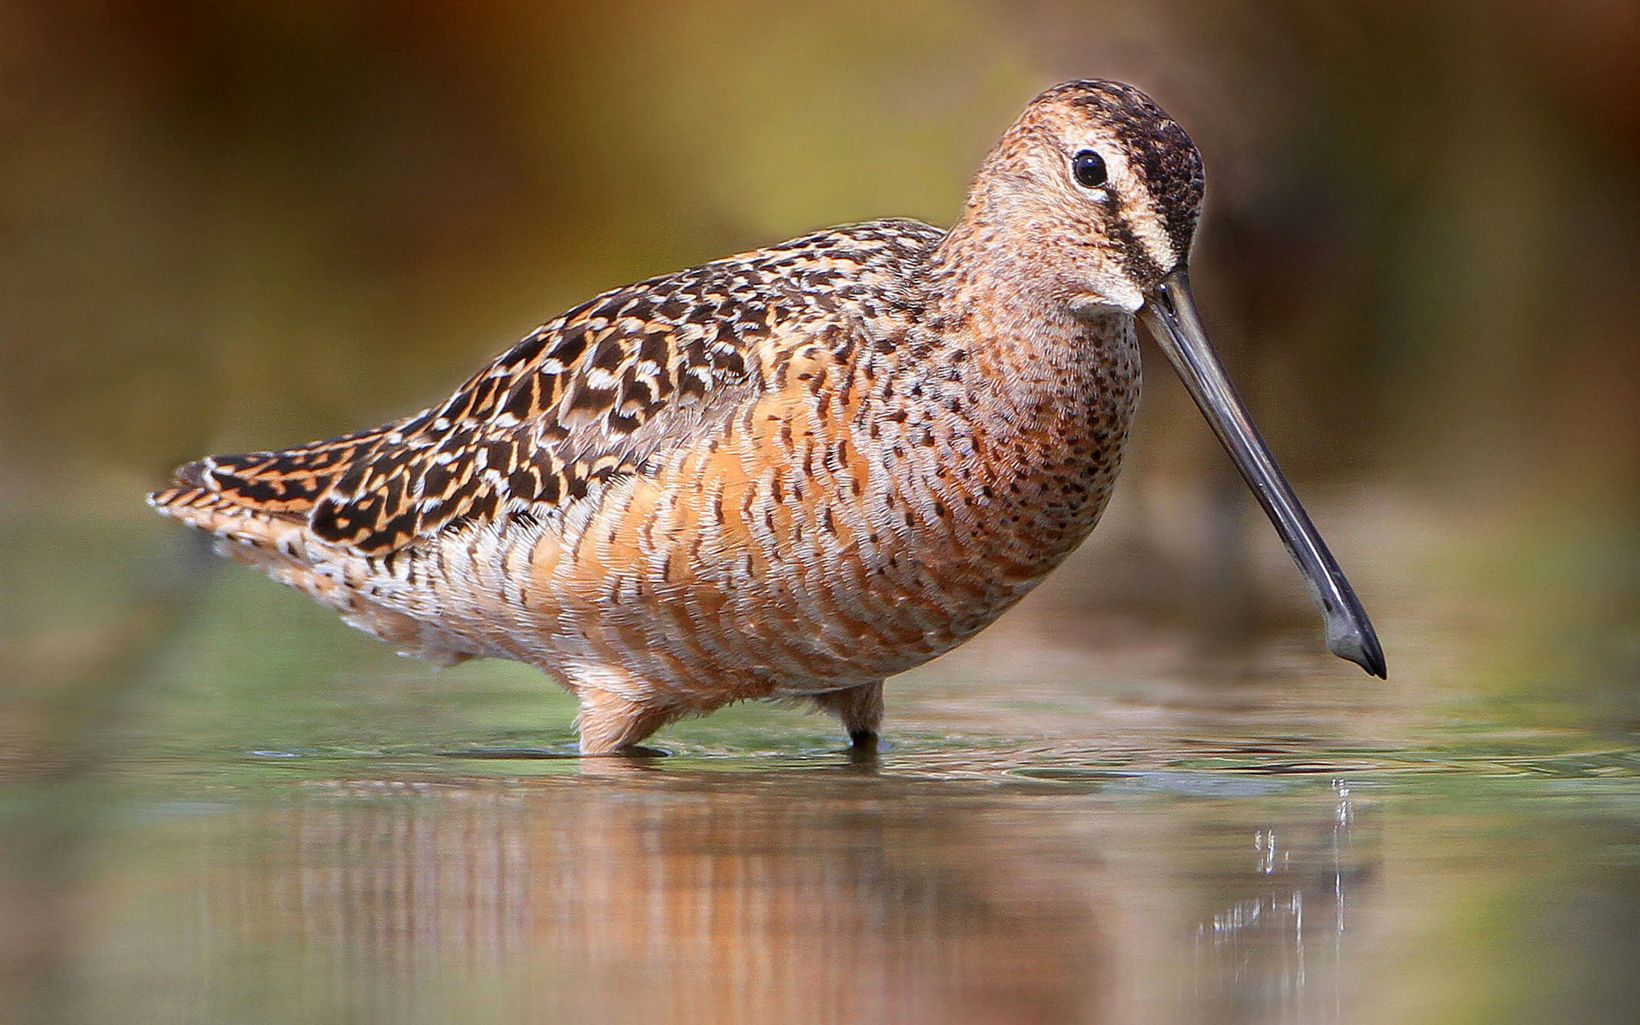 Long-billed Dowitcher The long-billed dowitcher is difficult to separate from the short-billed dowitcher, especially at a distance.  Most surveys combine the two into a single "dowitcher" listing.  © Flickr User Nigel (CC by 2.0)